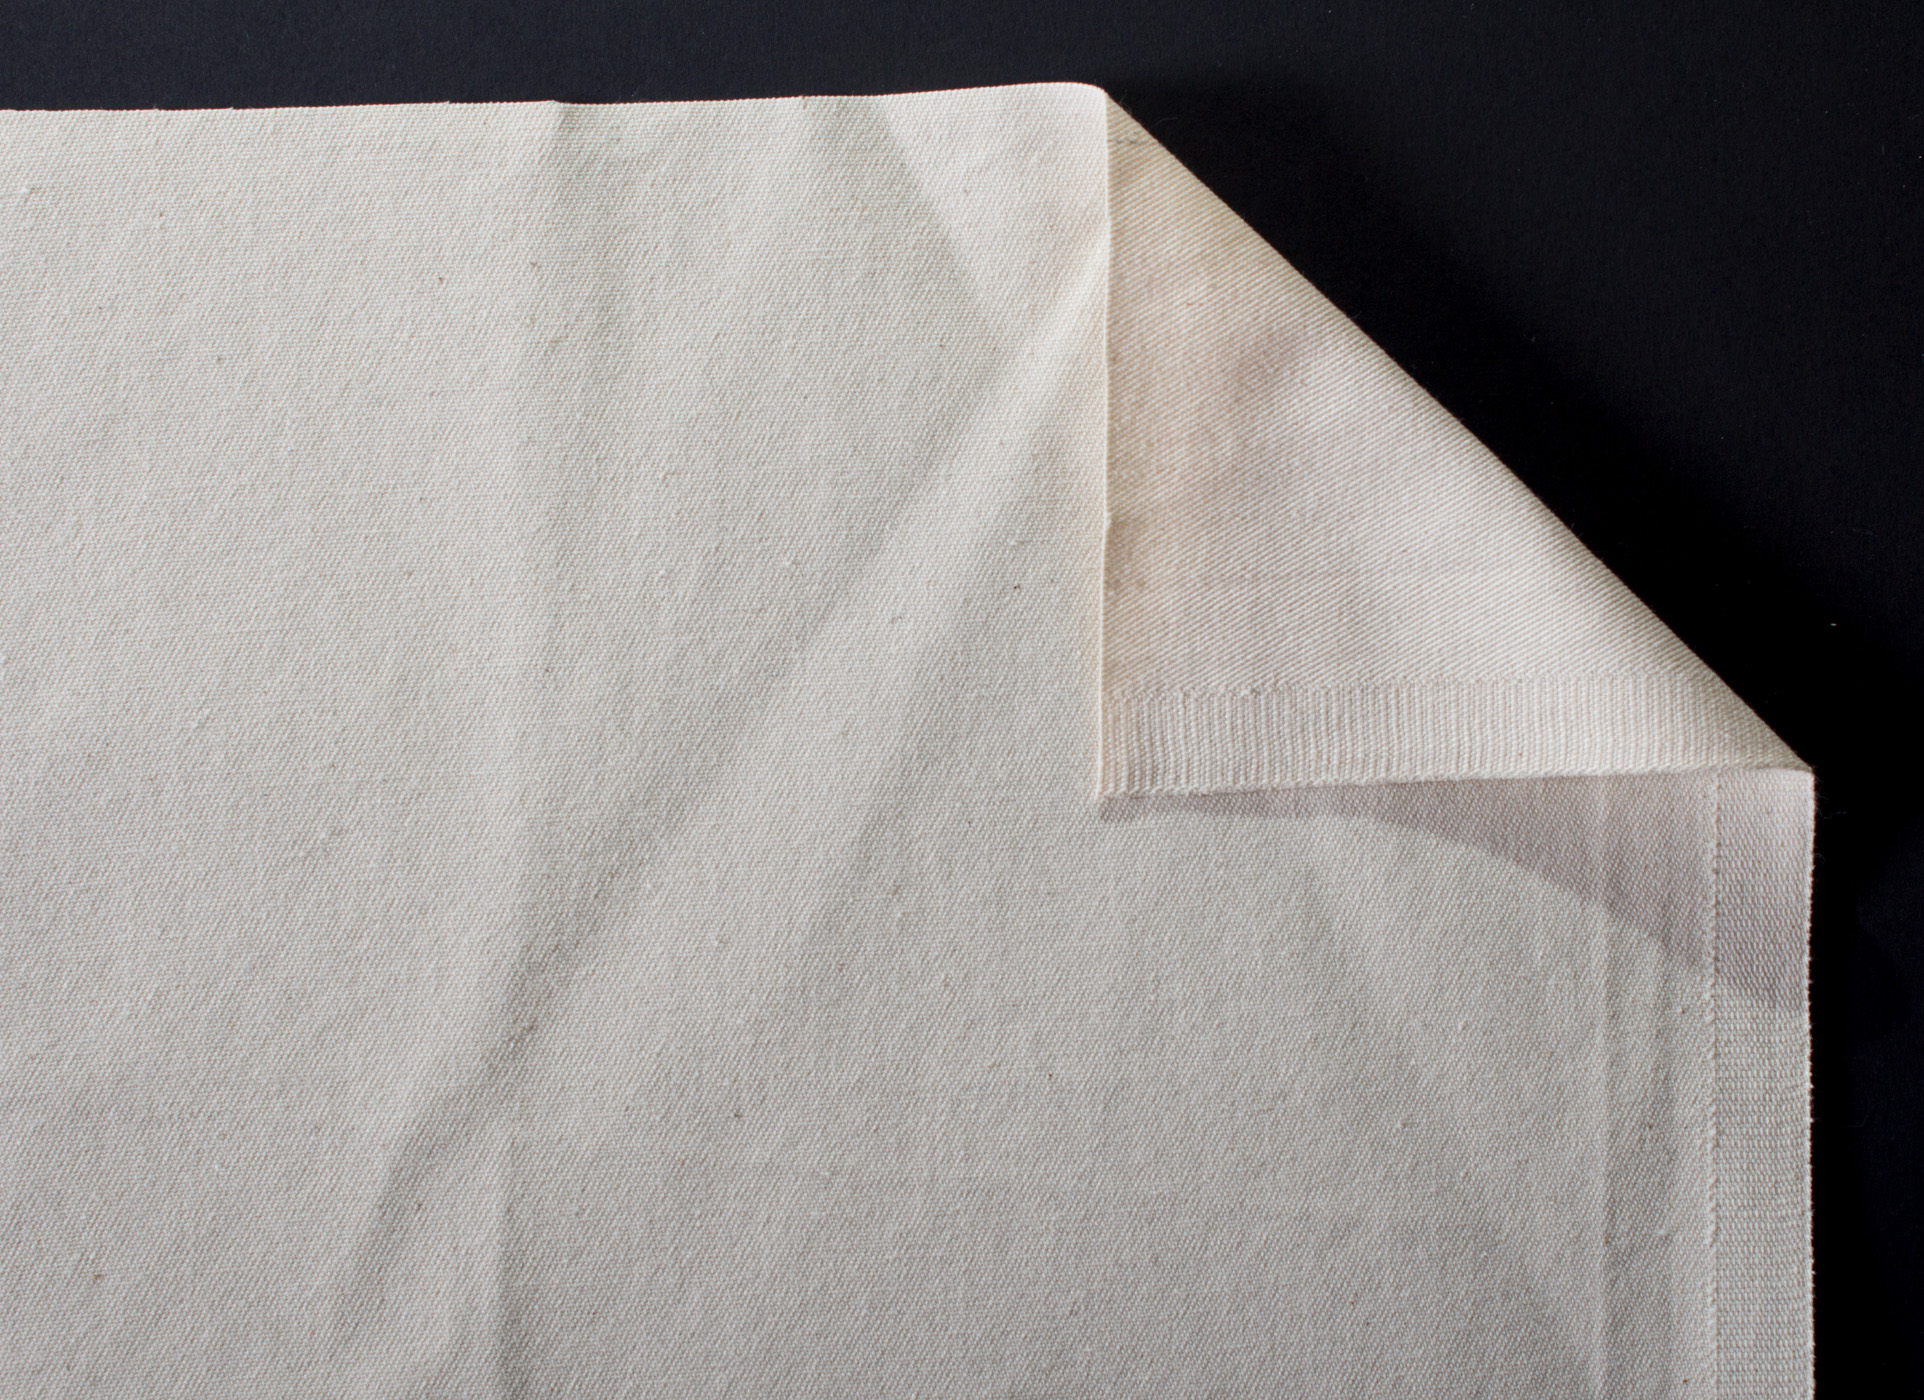 Unprimed cotton with  twill weave, 260 g/m2, 1.64 m width, No. 164